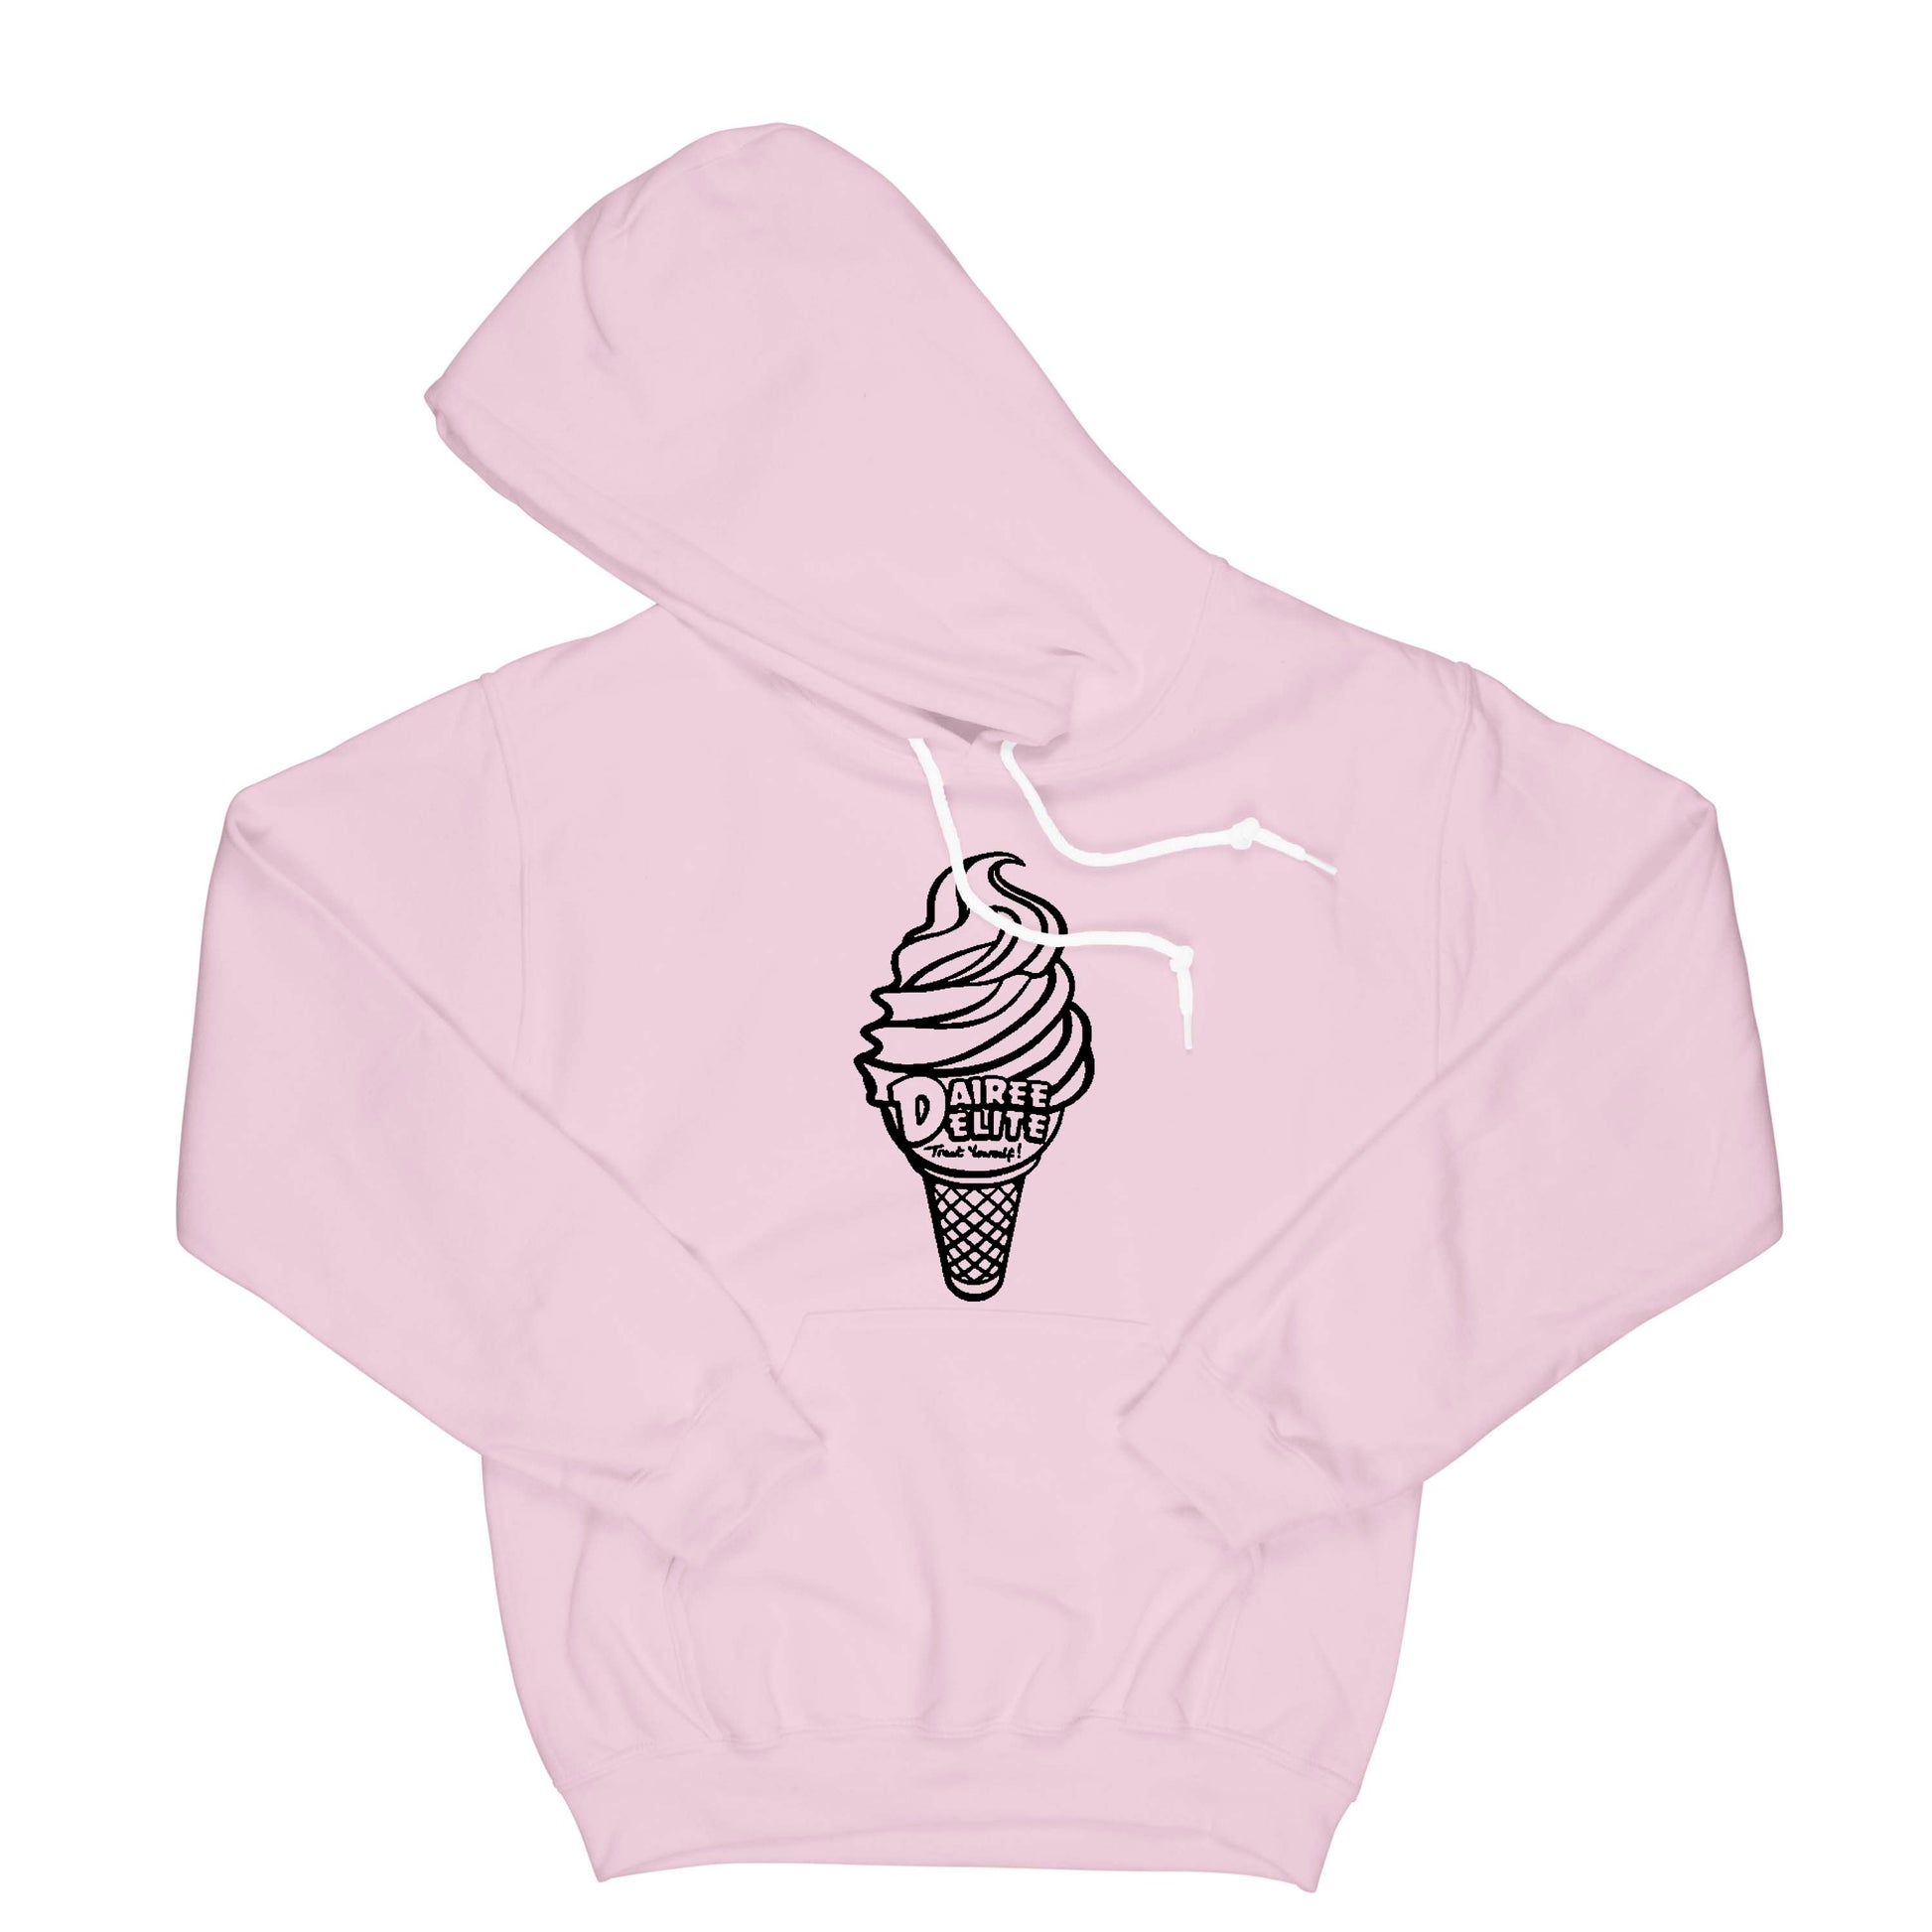 Dairee Delite 70th Anniversary Treat Yourself Cone Hoodie Small Light Pink